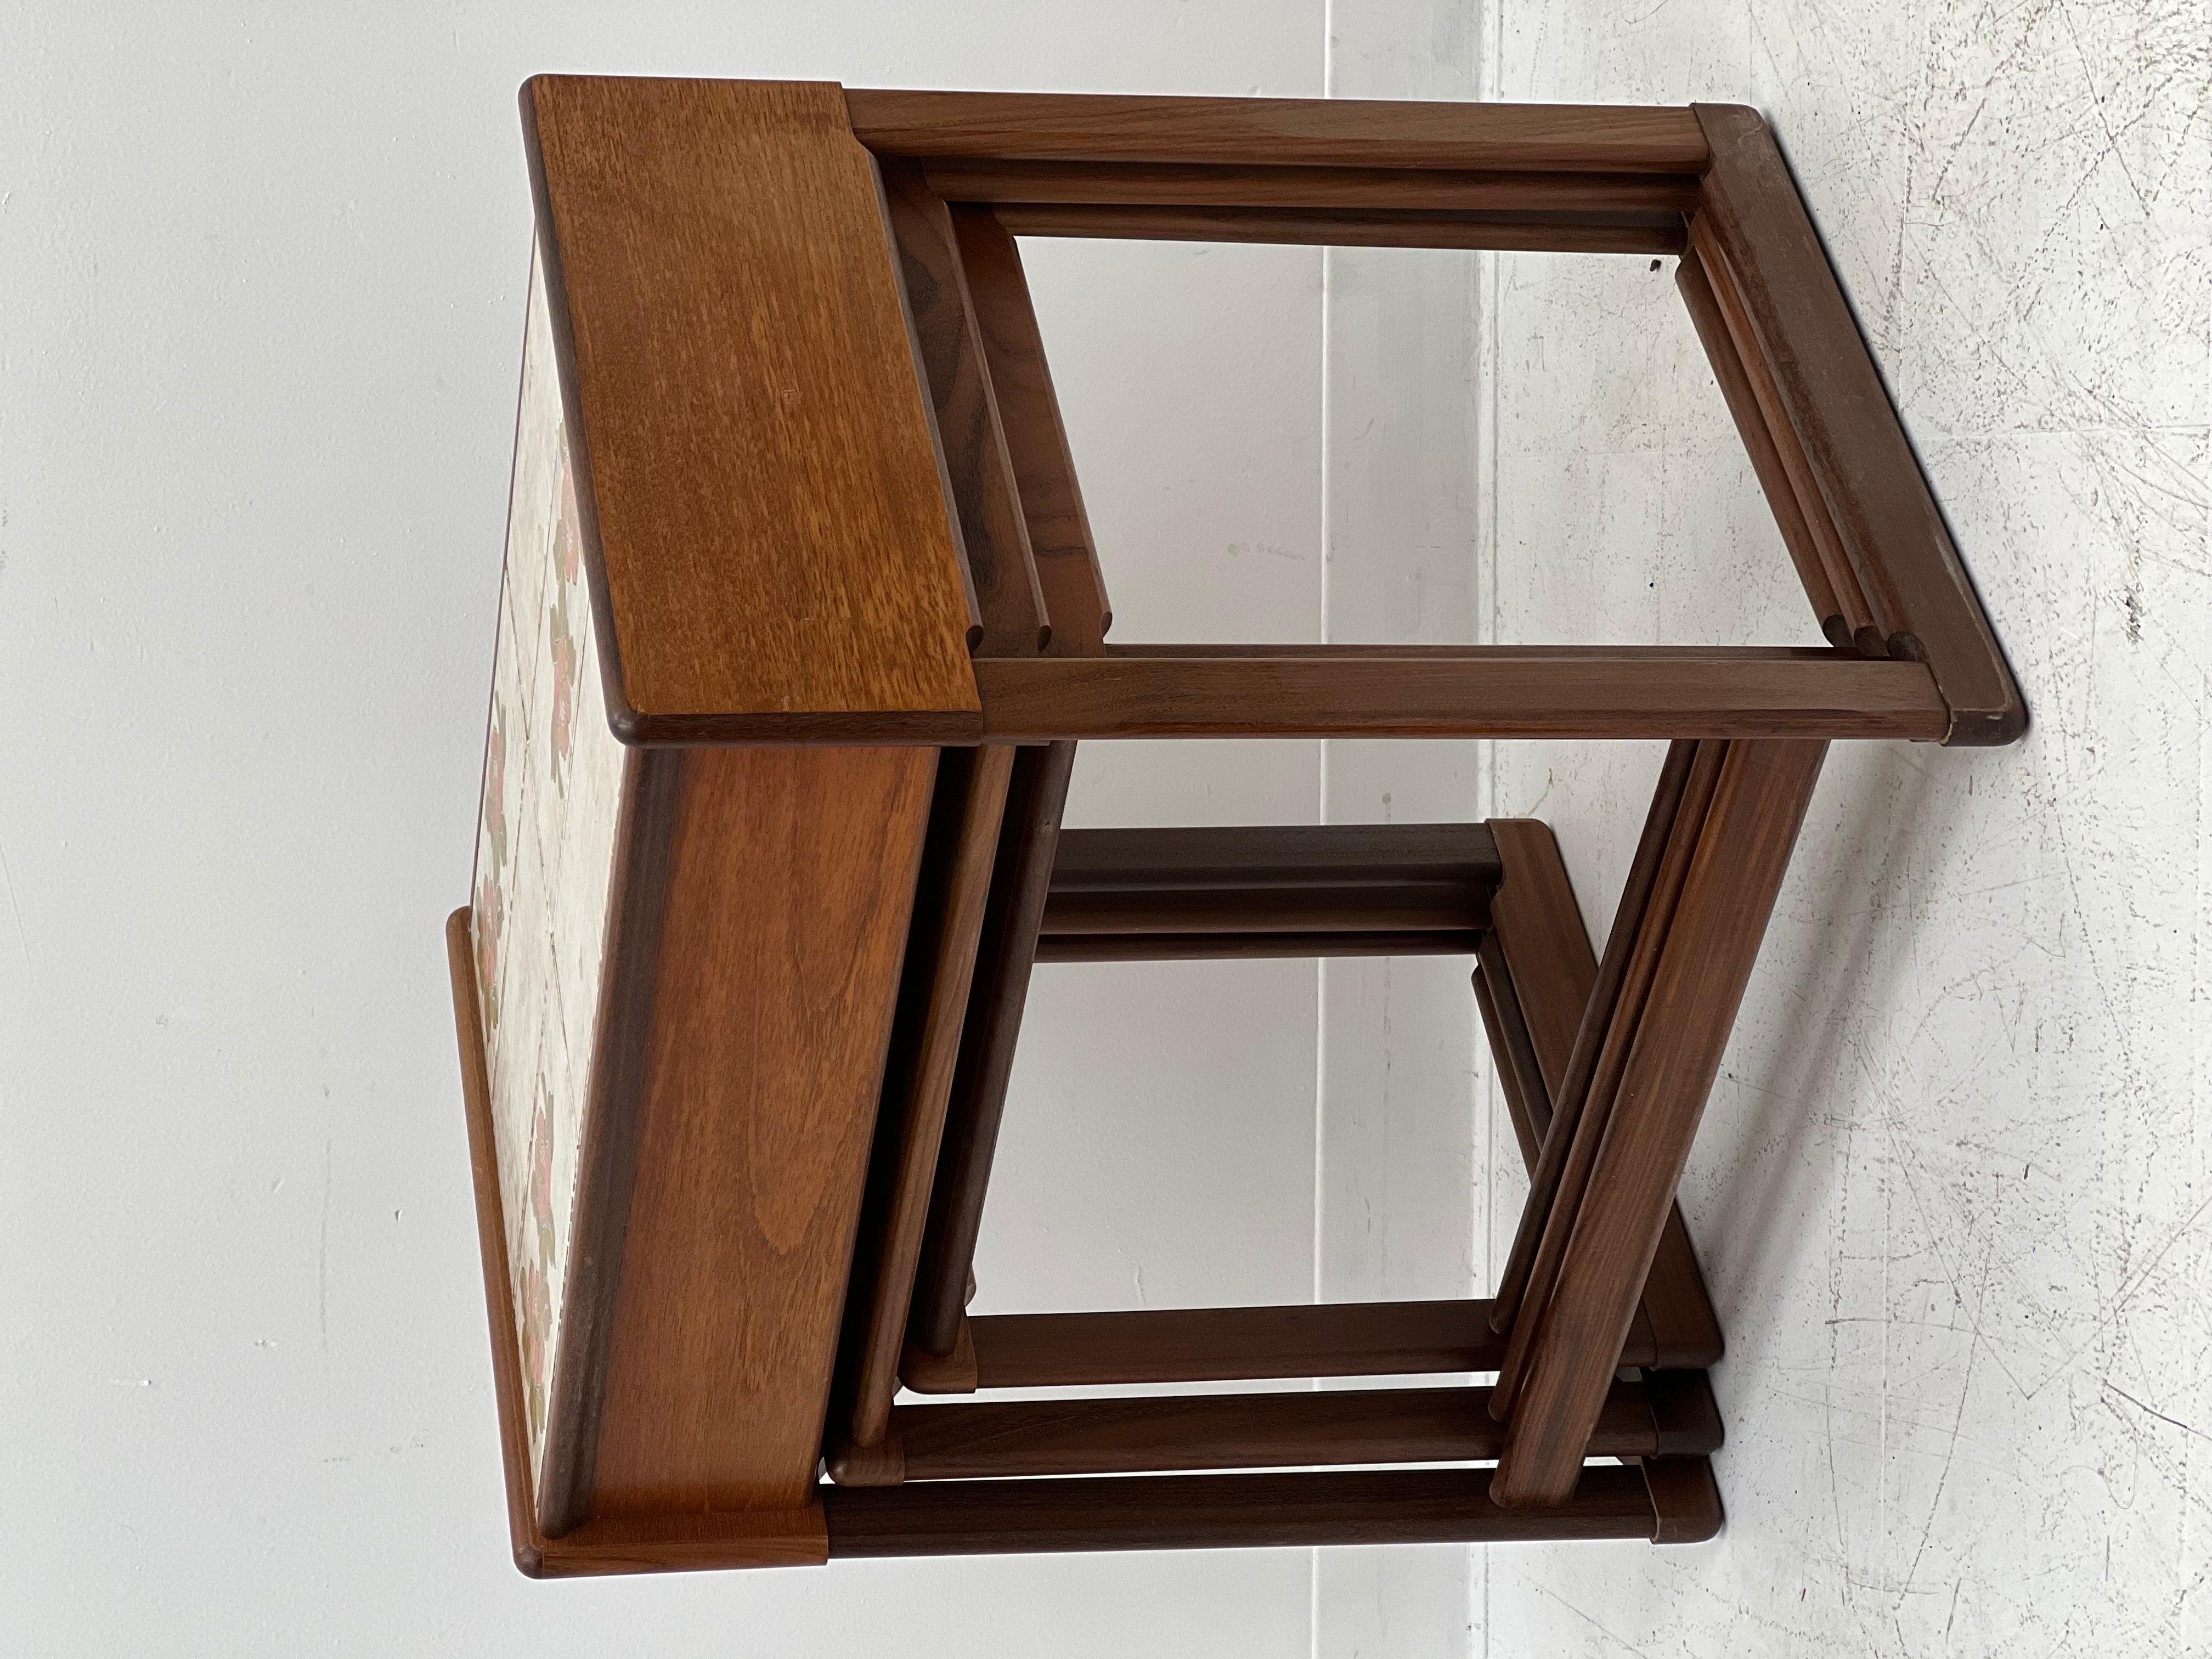 Imported Solid Teak Danish Modern Tile Top Nesting Table In Good Condition For Sale In Seattle, WA